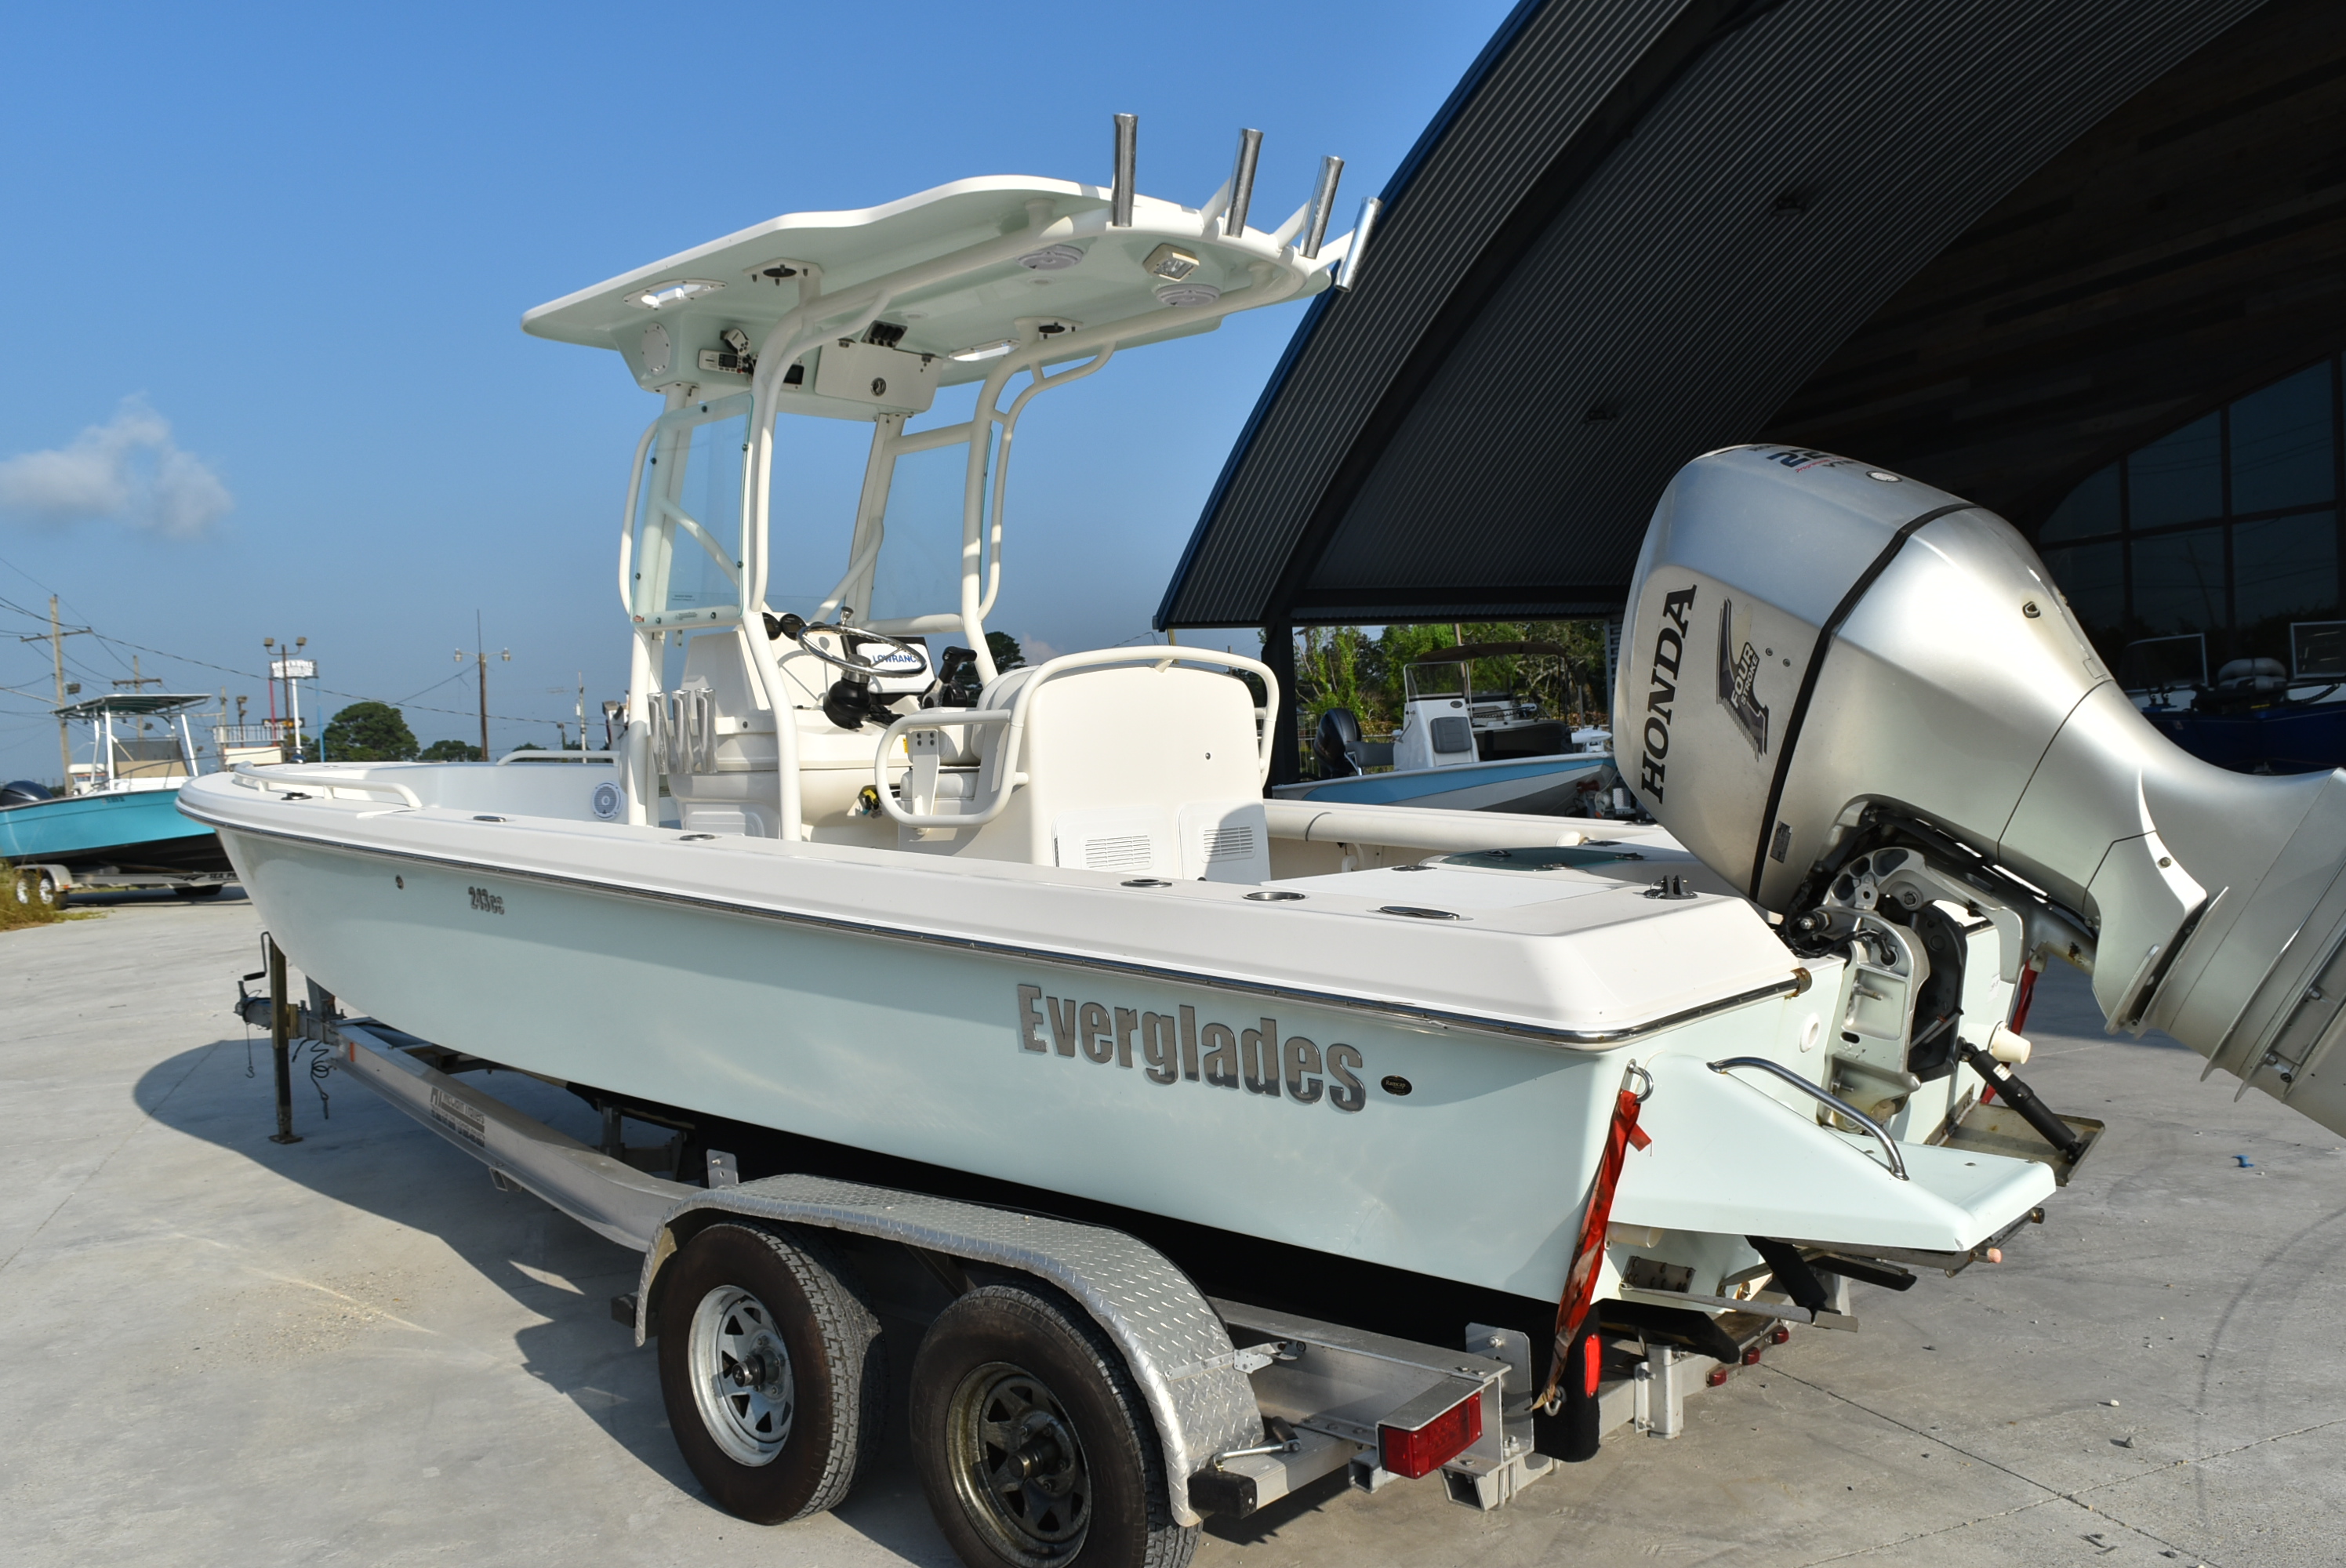 2007 Everglades boat for sale, model of the boat is 243 CC & Image # 5 of 15